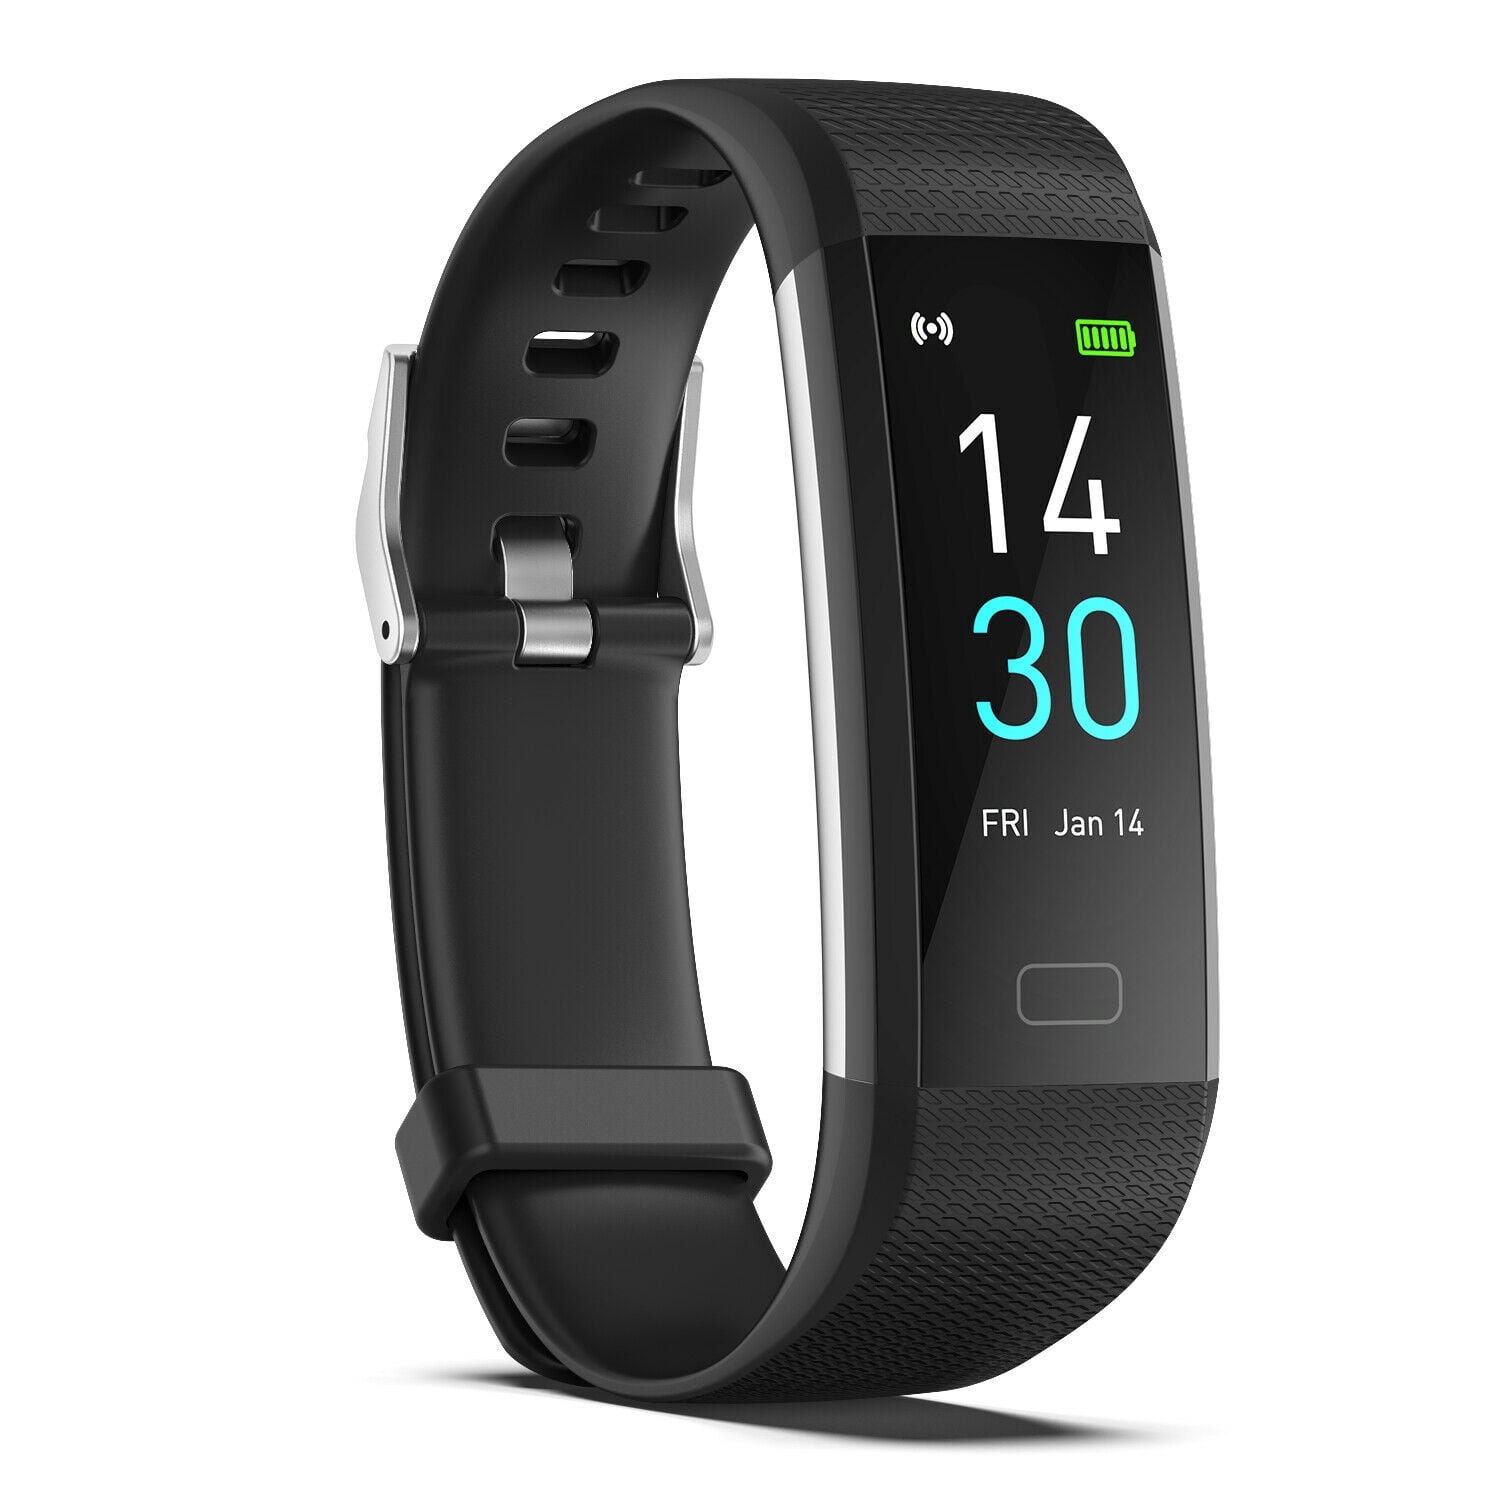 S5 Fitness Tracker Watch with IP68 Waterproof, Activity Tracker Heart Rate, Sleep Monitor, Sedentary Reminder, Counter, and Notification Reminder Walmart.com